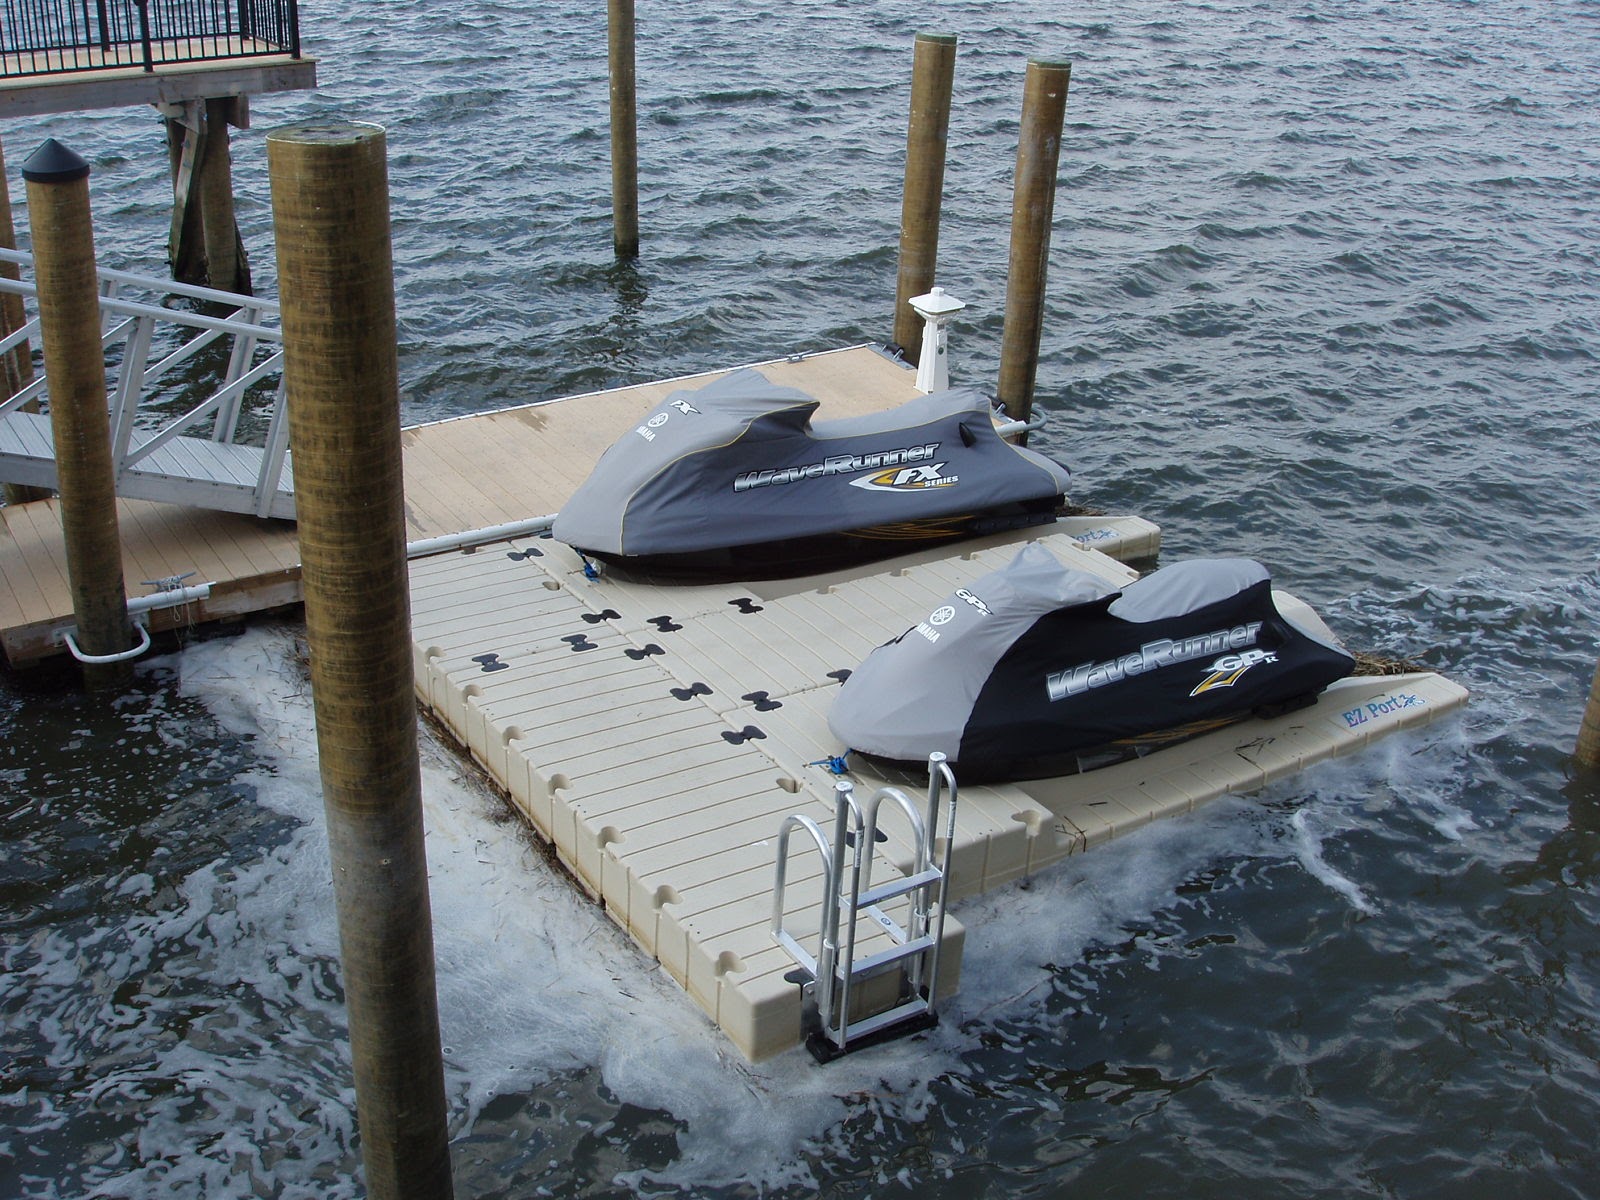 two jetskis docked out of water